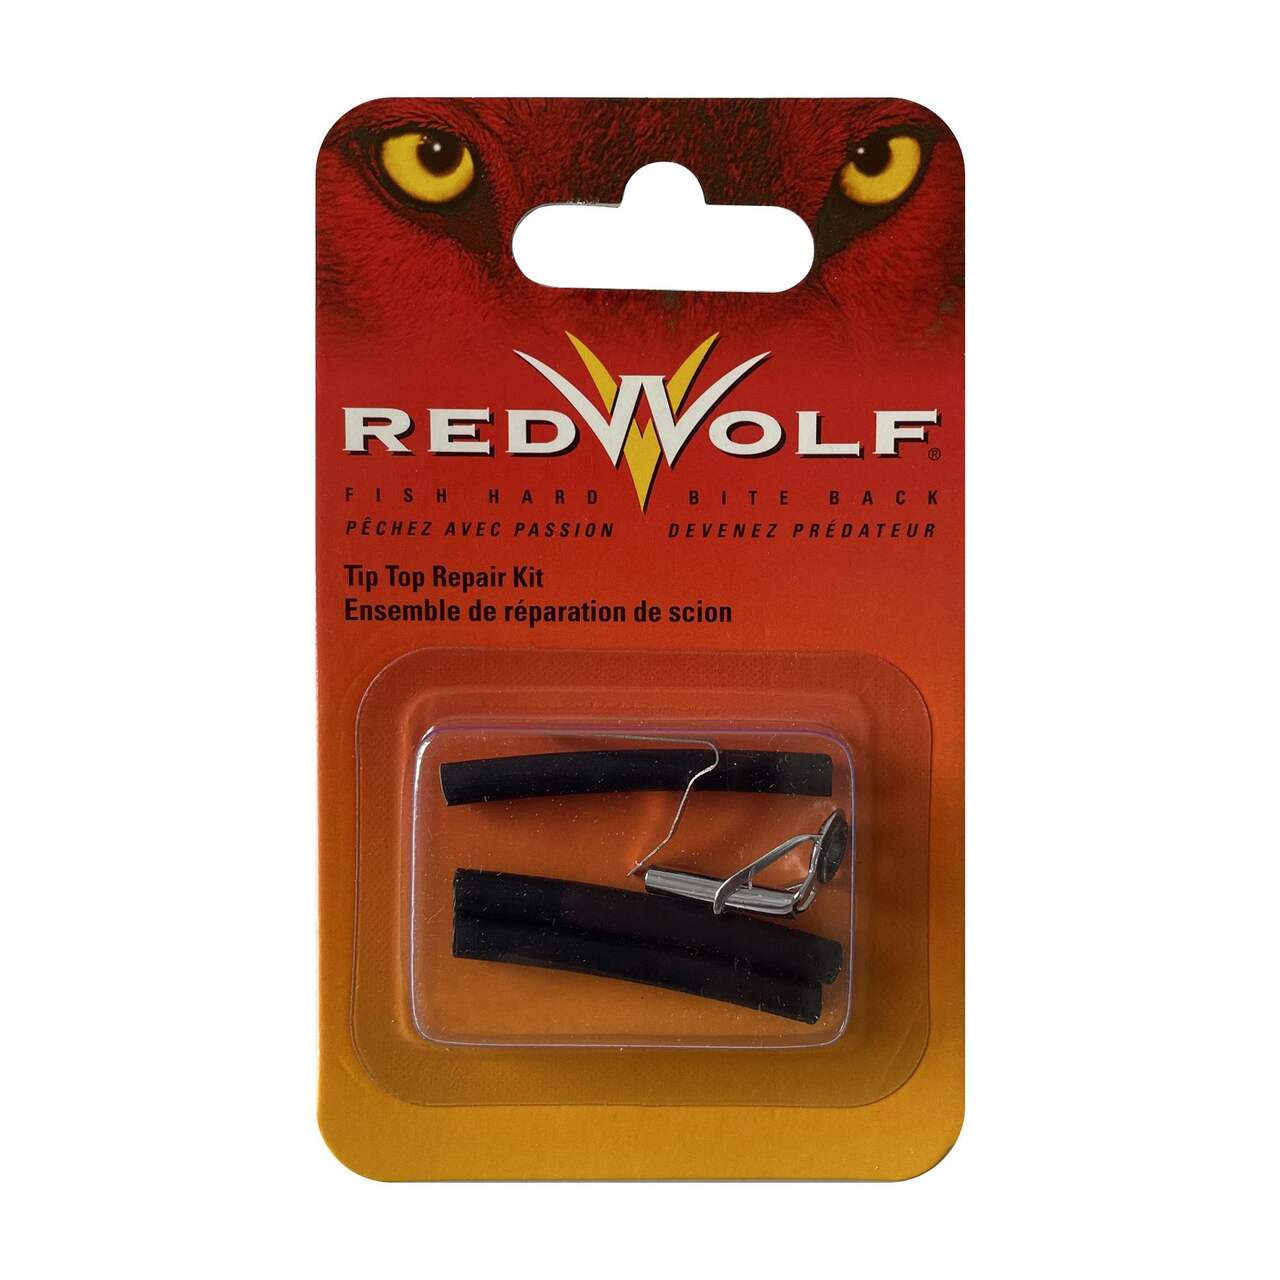 https://media-www.canadiantire.ca/product/playing/fishing/fishing-accessories/0787505/red-wolf-tip-top-repair-kit-red-wolf-7da05e9e-0132-4315-a001-88a7fec6ed62-jpgrendition.jpg?imdensity=1&imwidth=1244&impolicy=mZoom